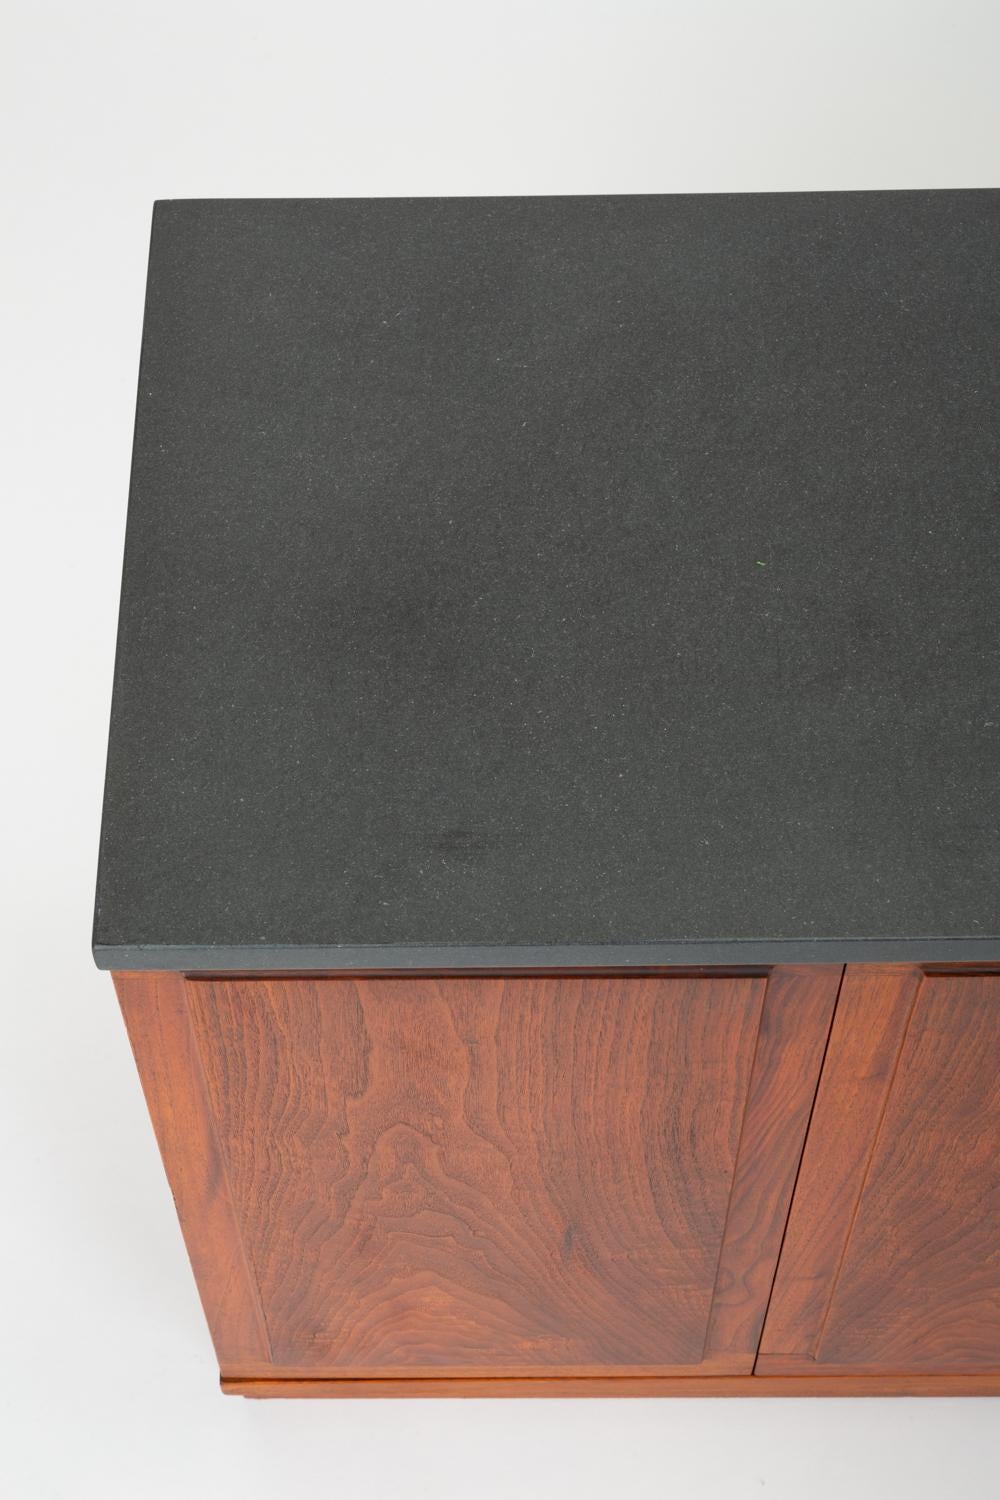 Slate-Top Walnut Sideboard by Jack Cartwright for Founders 8